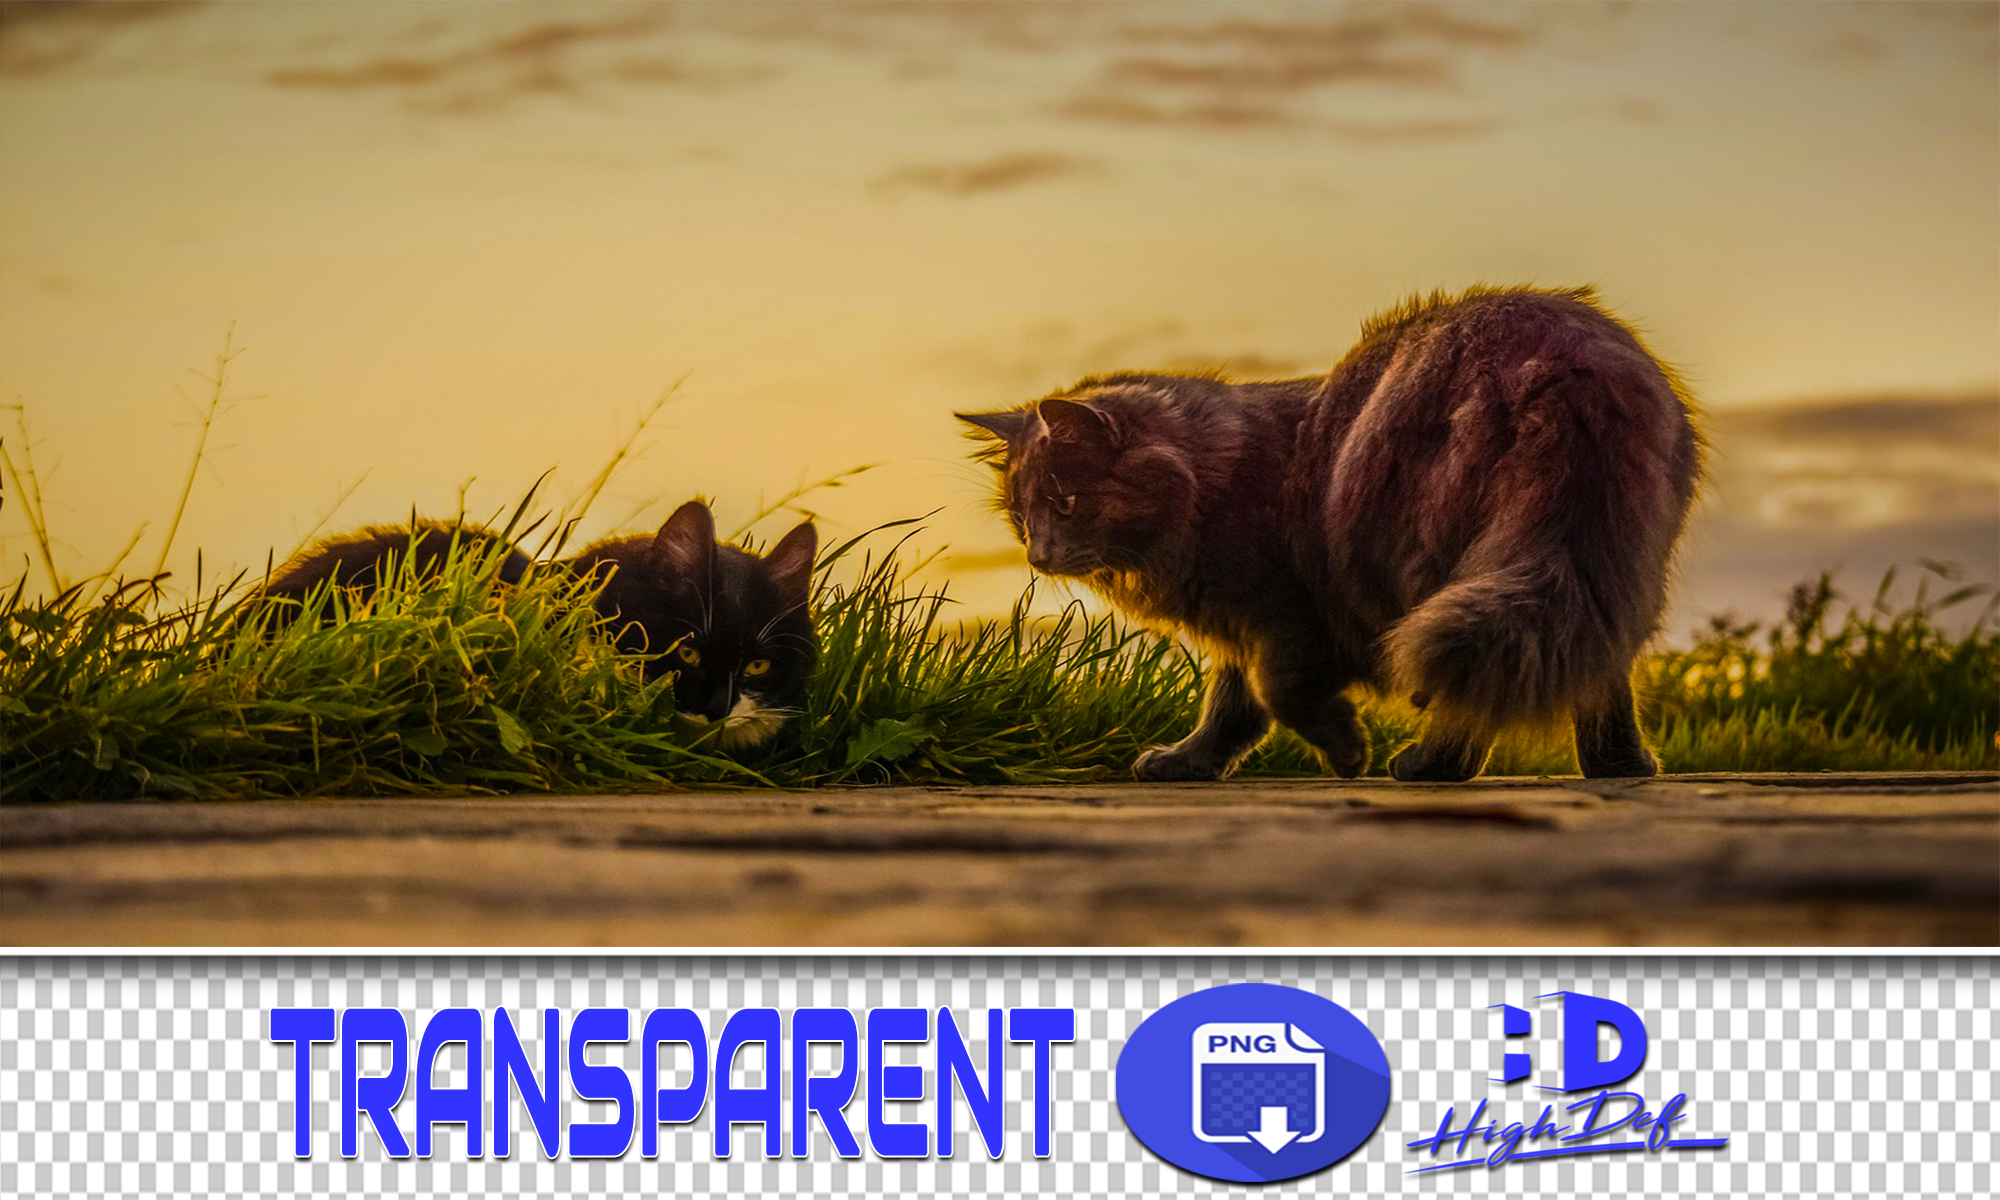 300 CATS TRANSPARENT PNG ANIMALS PHOTOSHOP OVERLAYS BACKGROUNDS By Digital  Media Design | TheHungryJPEG